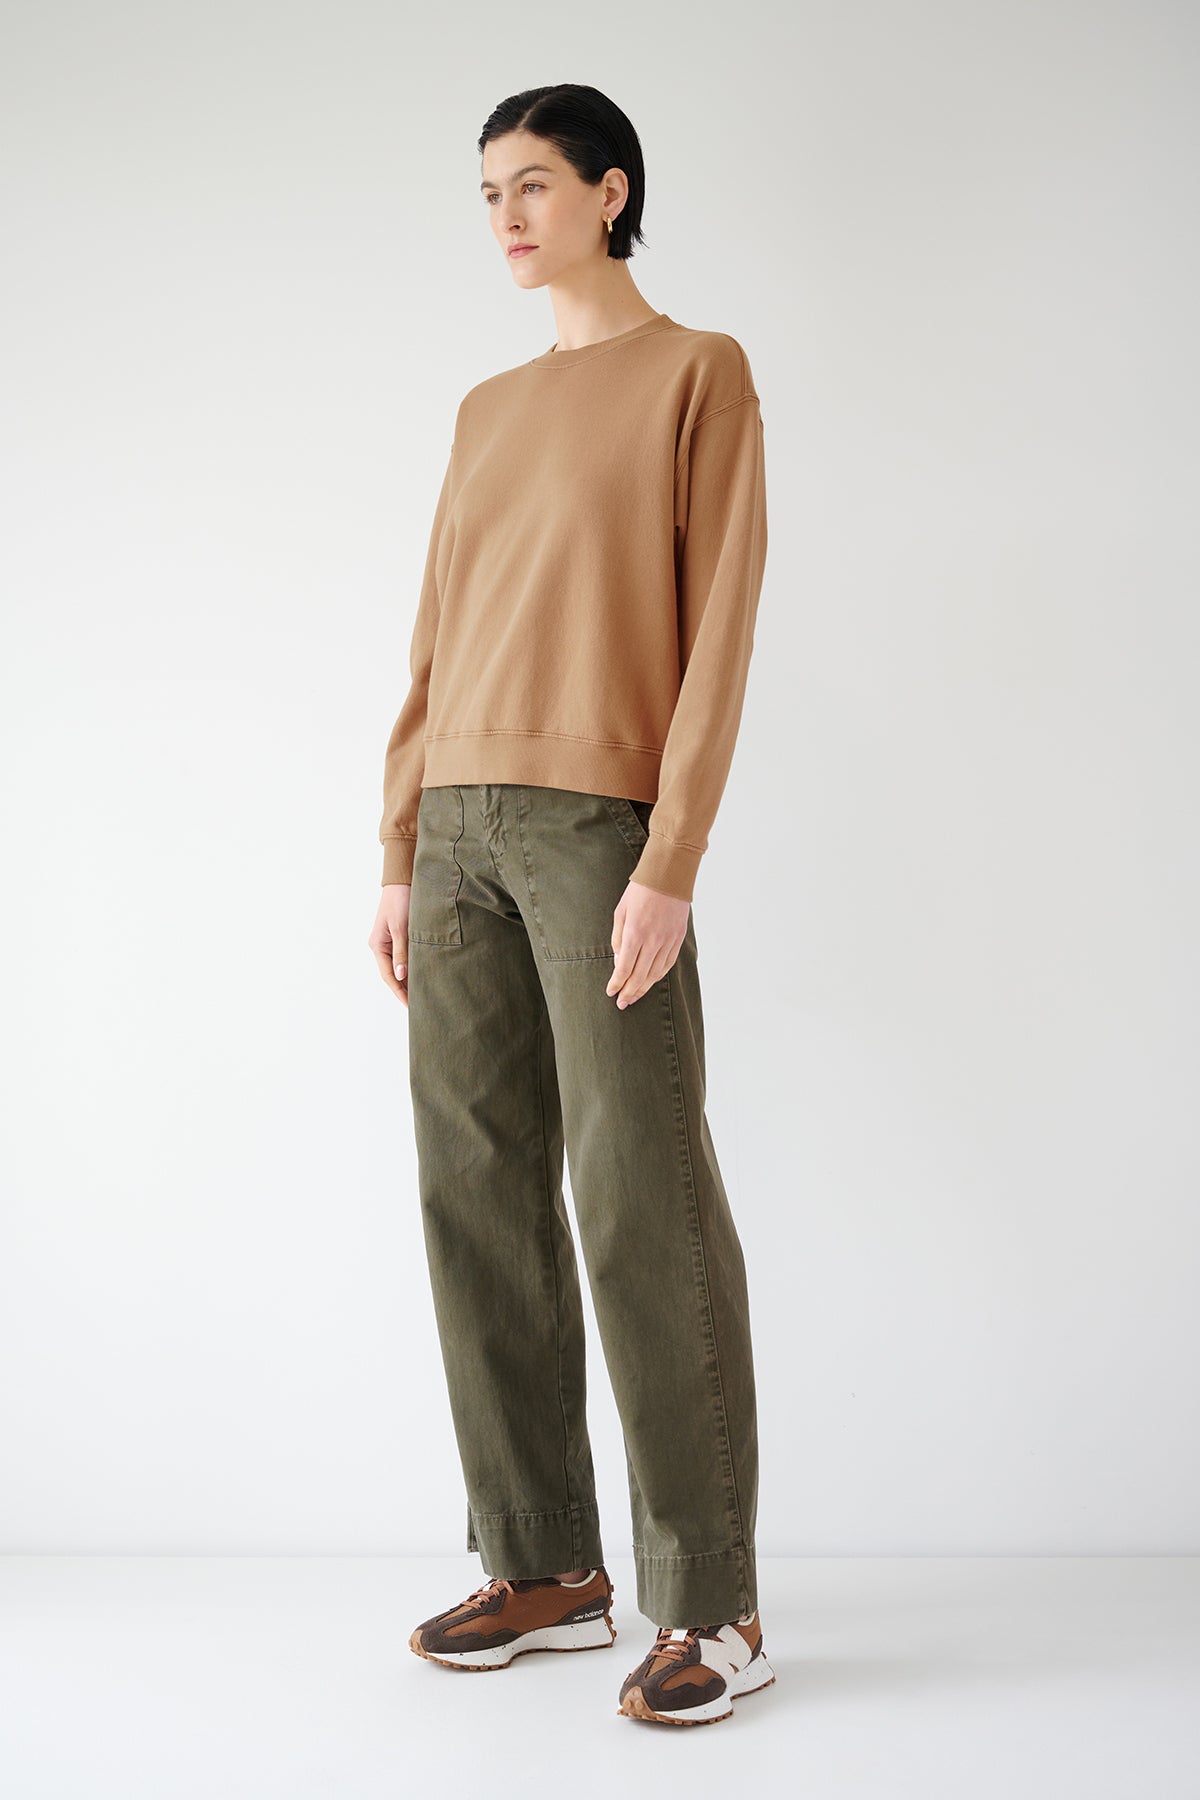 The model is wearing a YNEZ SWEATSHIRT by Velvet by Jenny Graham and brown pants.-35547451031745